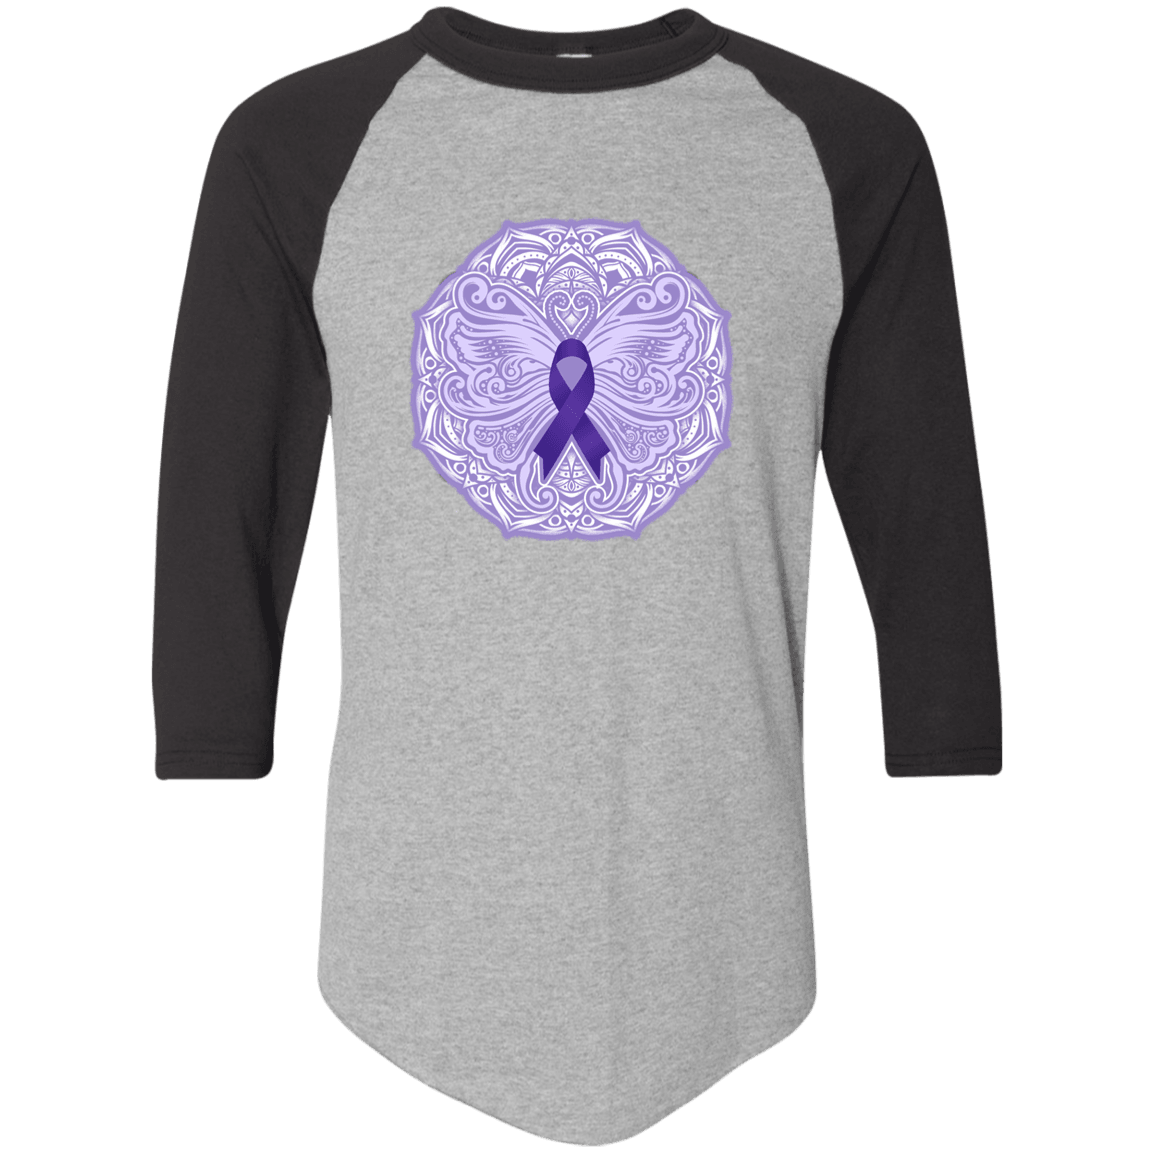 Designs by MyUtopia Shout Out:Epilepsy Awareness Butterfly 3/4 Length Sleeve Color block Raglan Jersey T-Shirt,Athletic Heather/Black / S,Adult Unisex T-Shirt